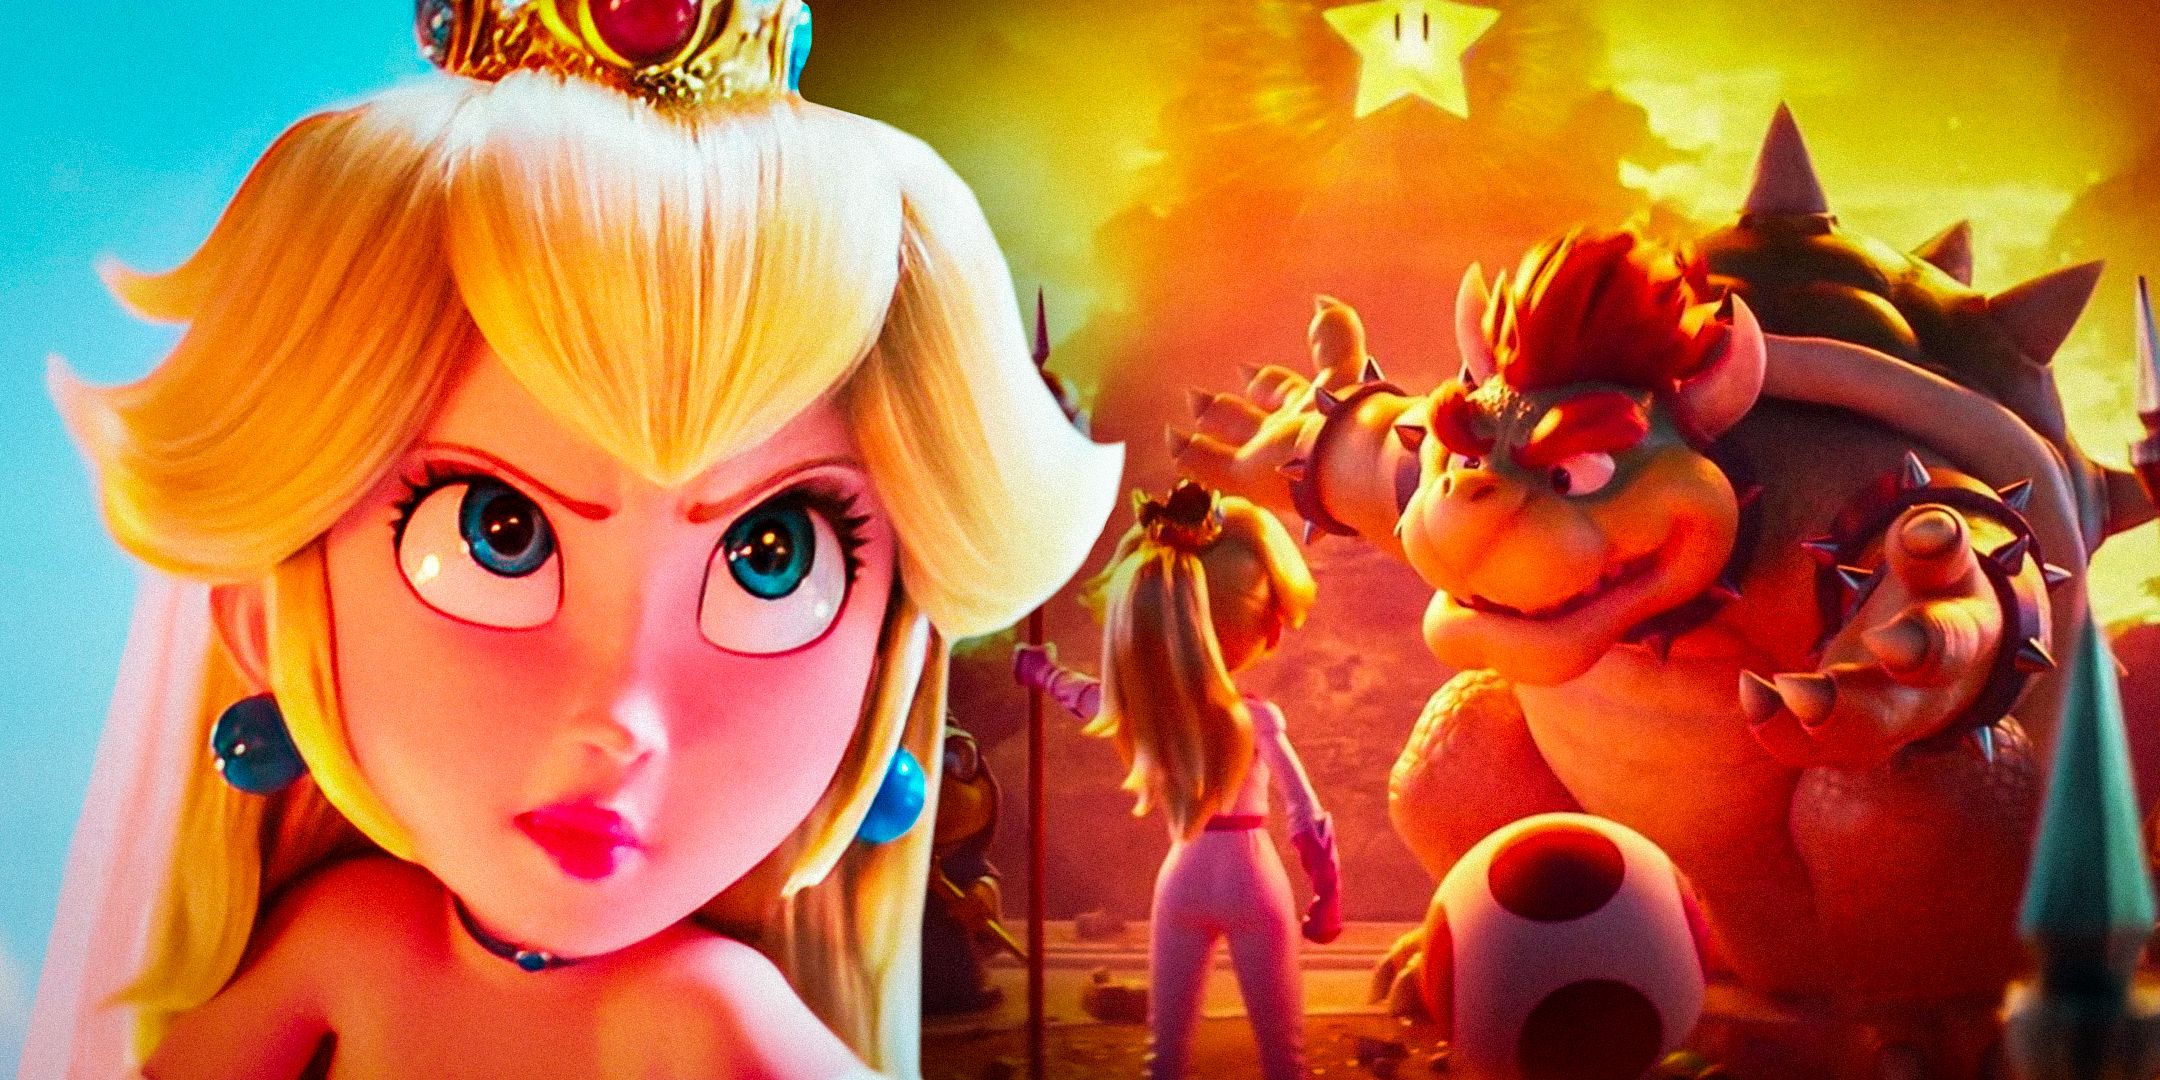 Split image of Peach from The Super Mario Bros. Movie and Toad, Peach, and Bowser